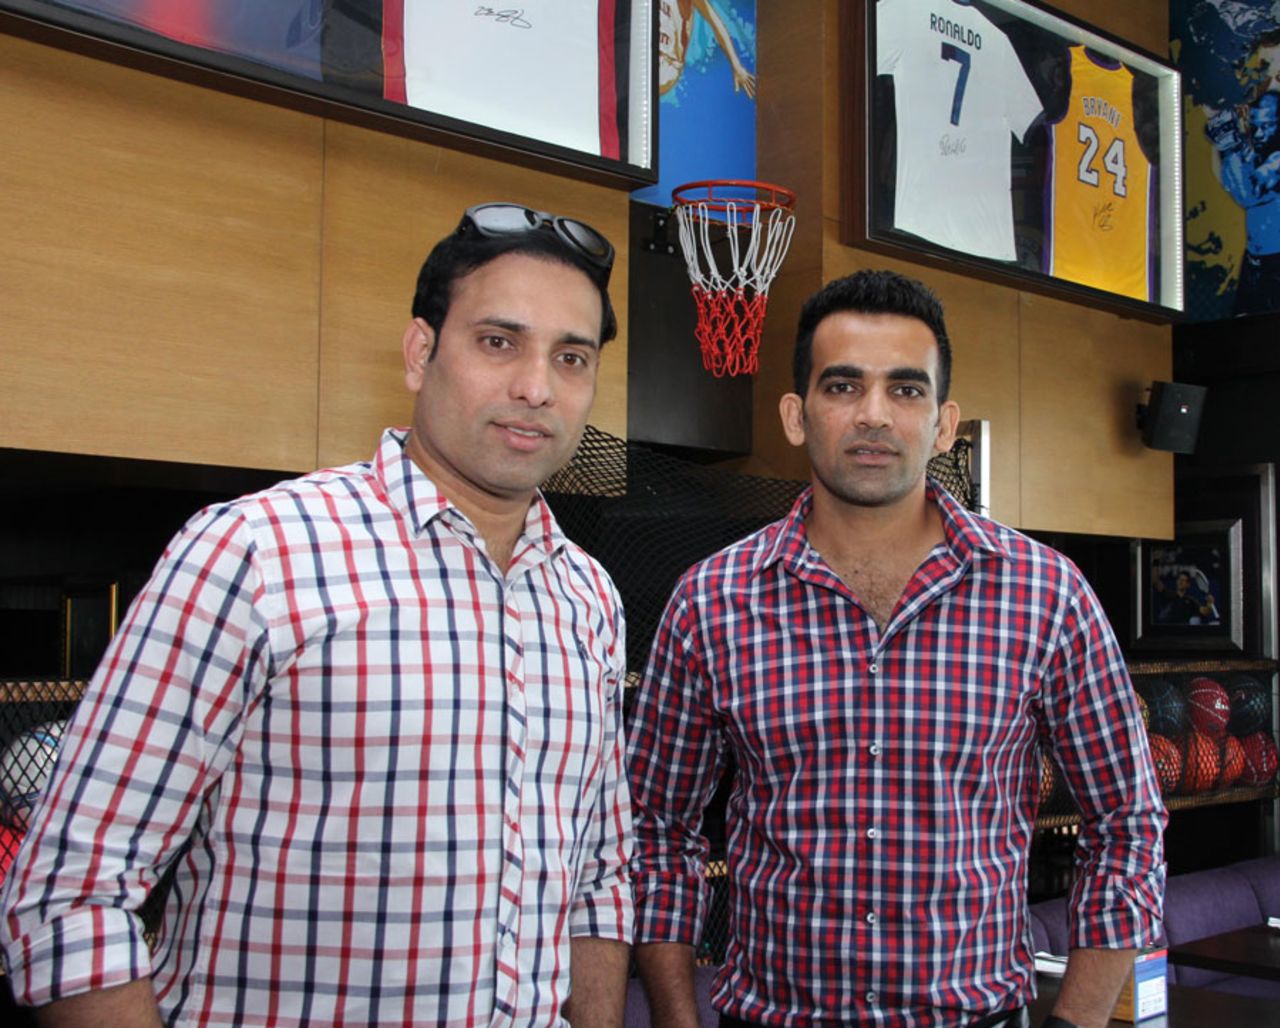 VVS Laxman and Zaheer Khan at the launch of the latter's sports lounge, Pune, September 1, 2013